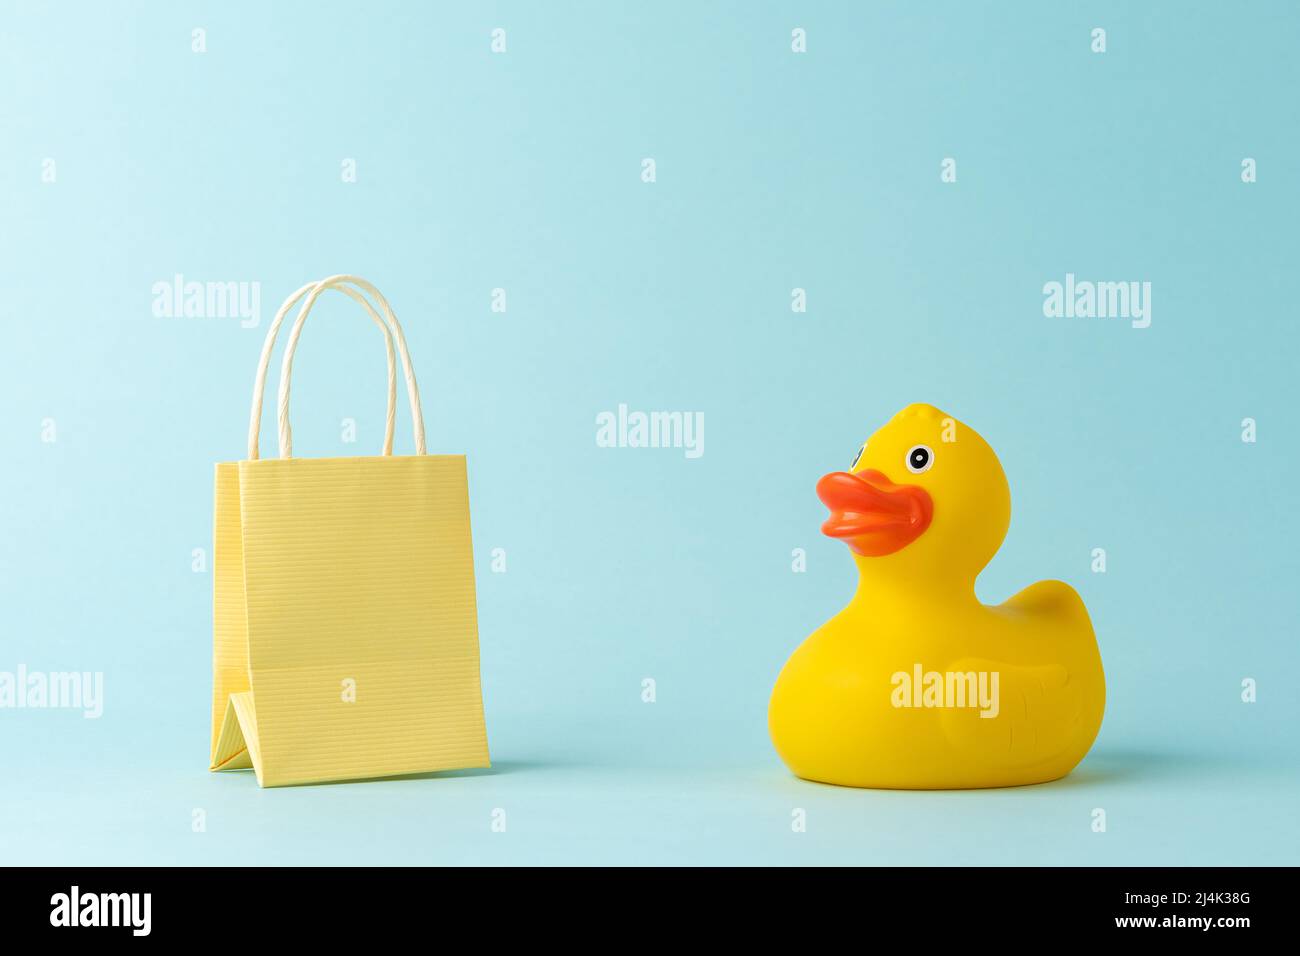 Rubber duck with shopping bag on blue background. Creative minimal shopping concept. Stock Photo